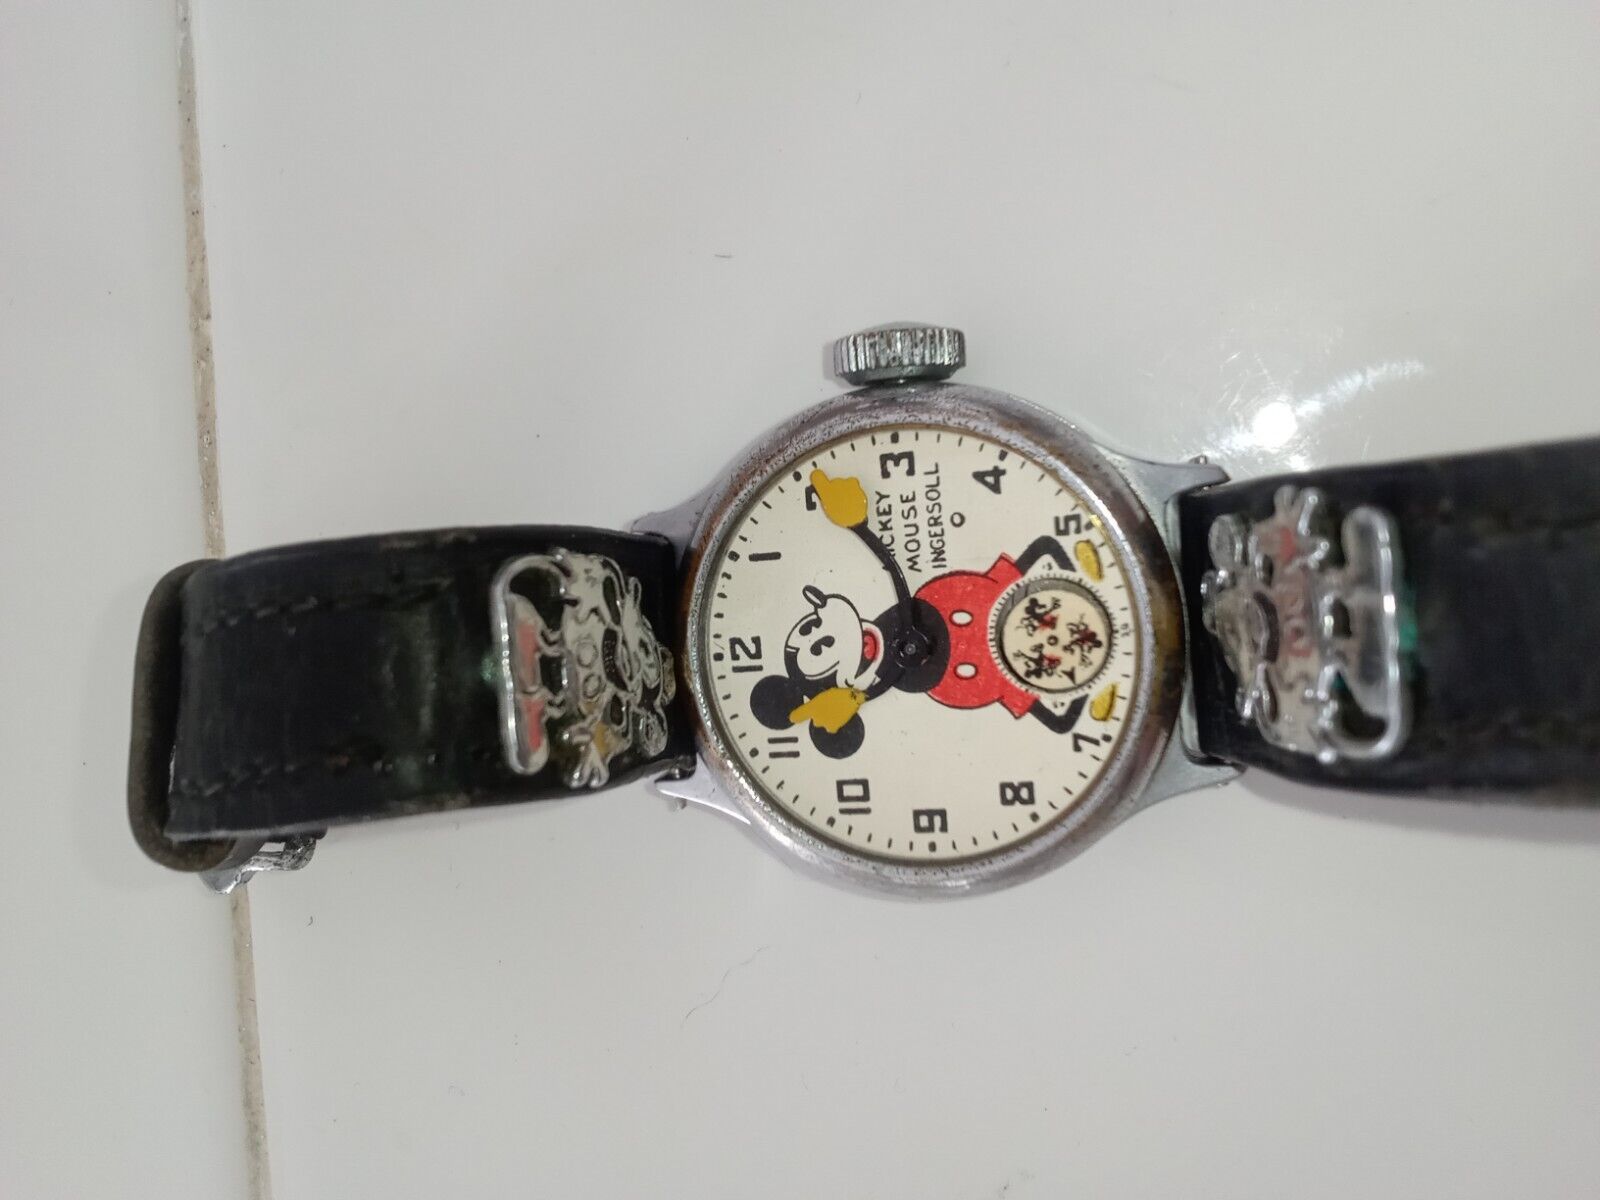  Original 1934 Ingersoll Mickey Mouse Watch w/ Leather Band sold as is nice look